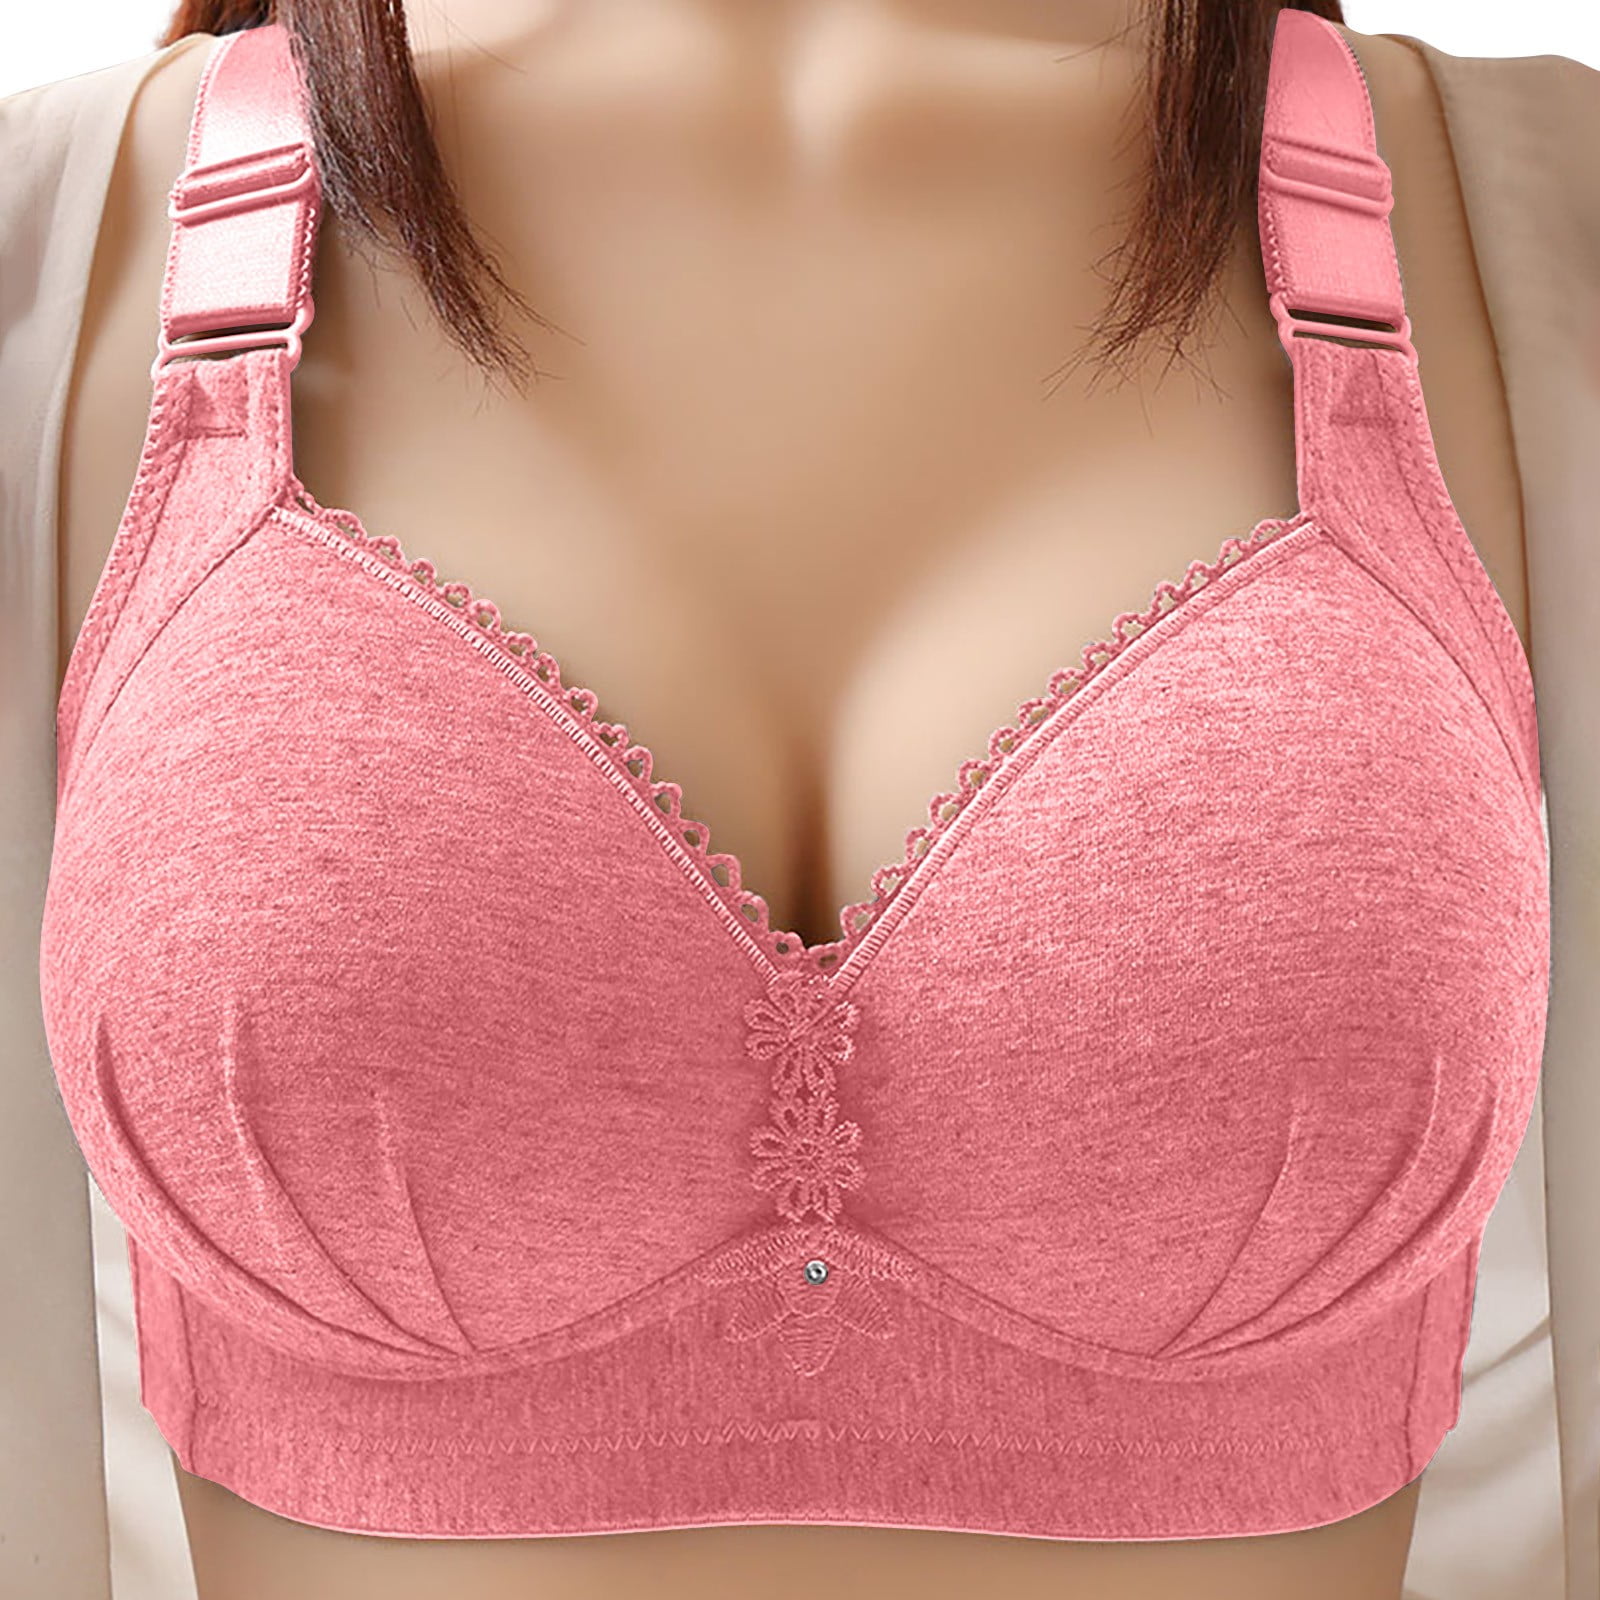 Back Smoothing Bras for Women Button Shapin Adjustable Shoulder Strap  Shapermint Bra for Womens Wirefree Beige 44